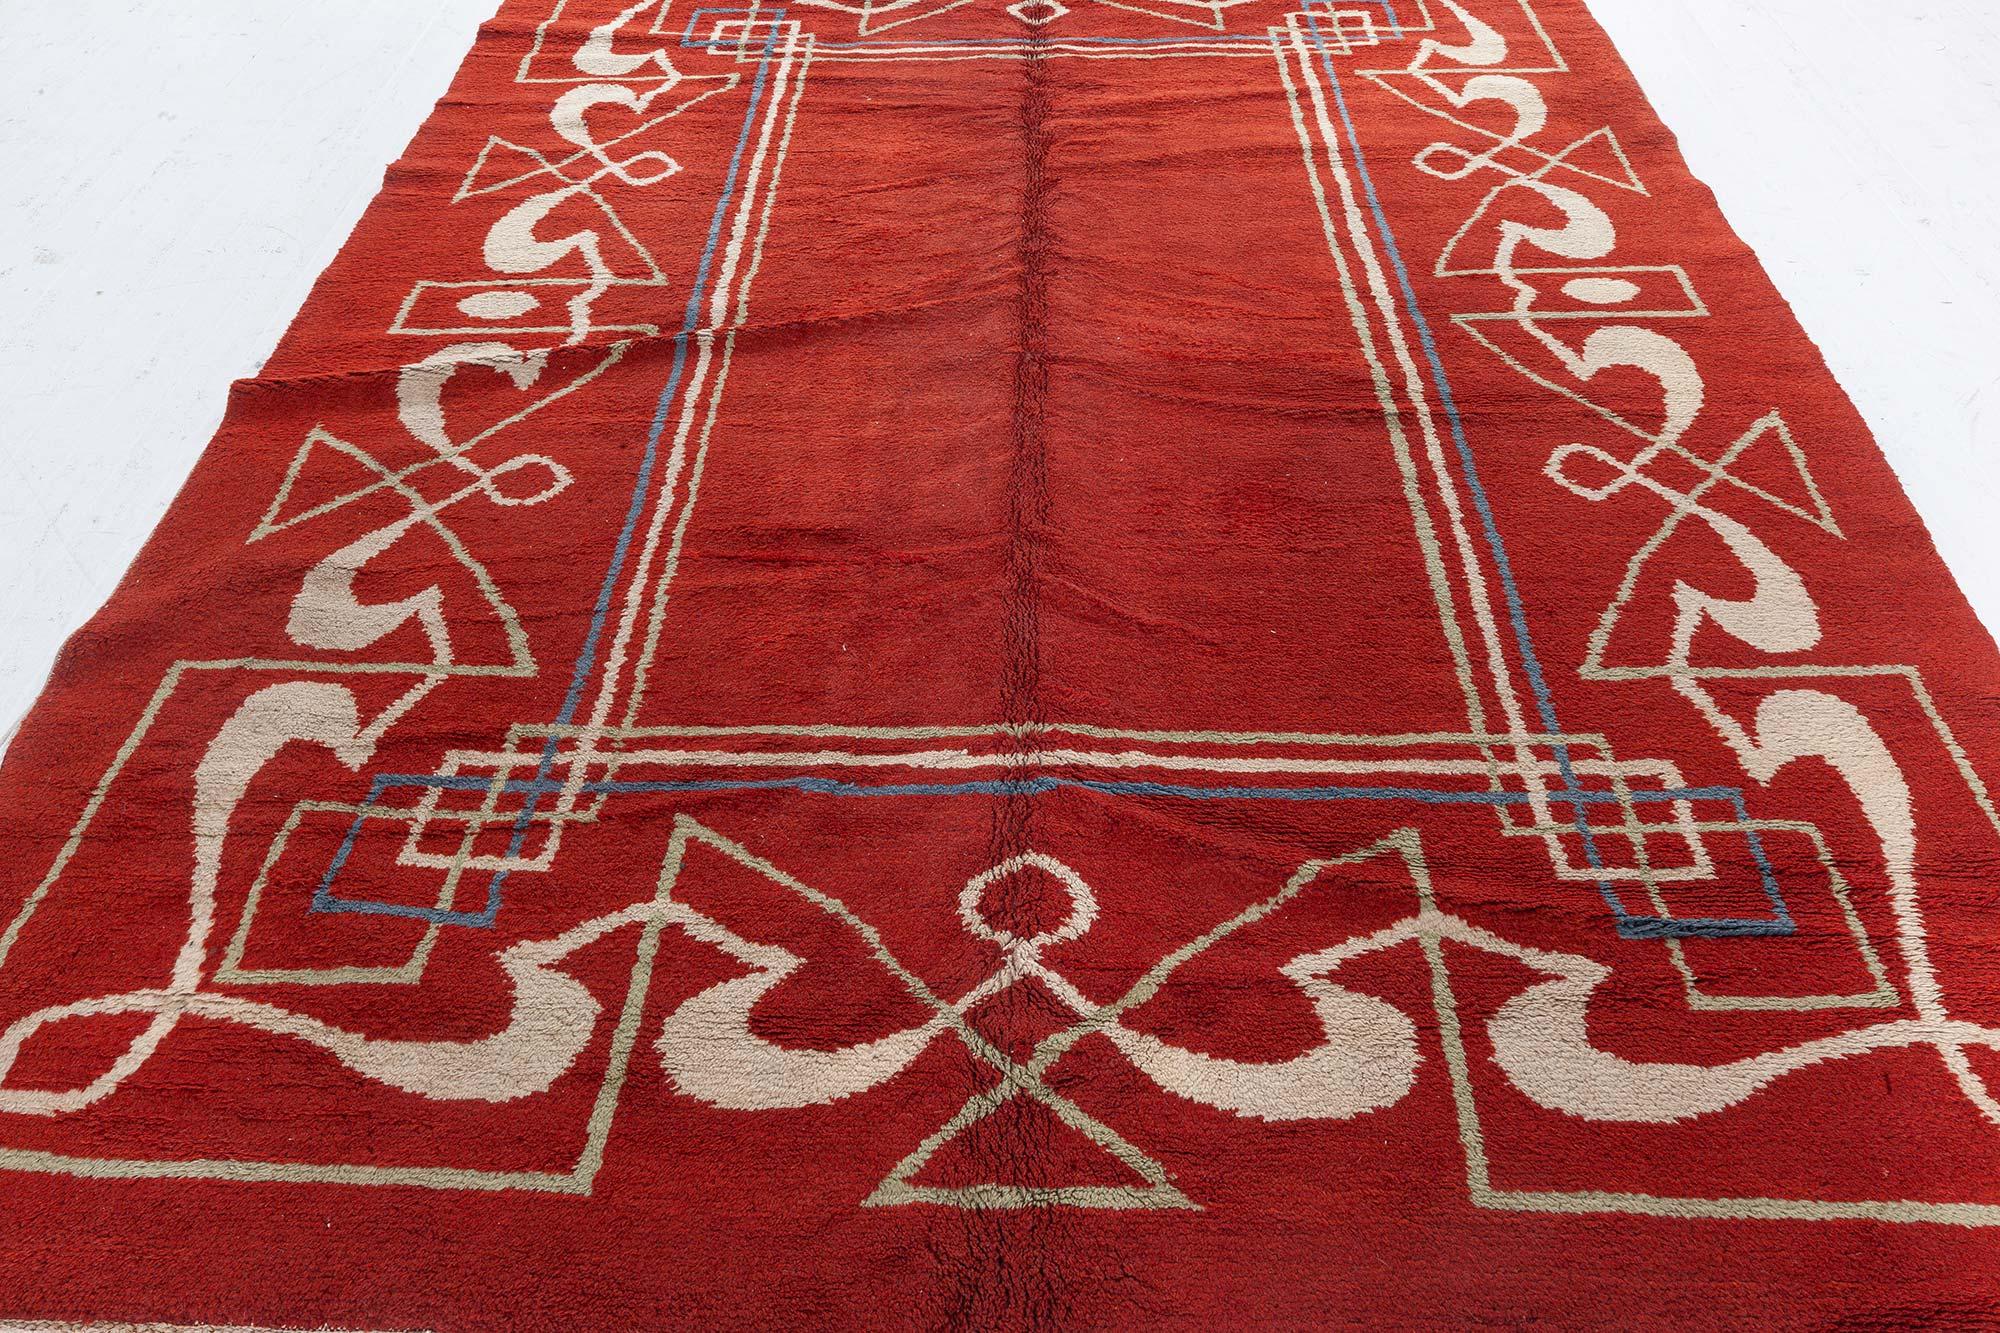 One-of-a-kind Art Deco Red, Brown Handmade Wool Rug
Size: 8'0